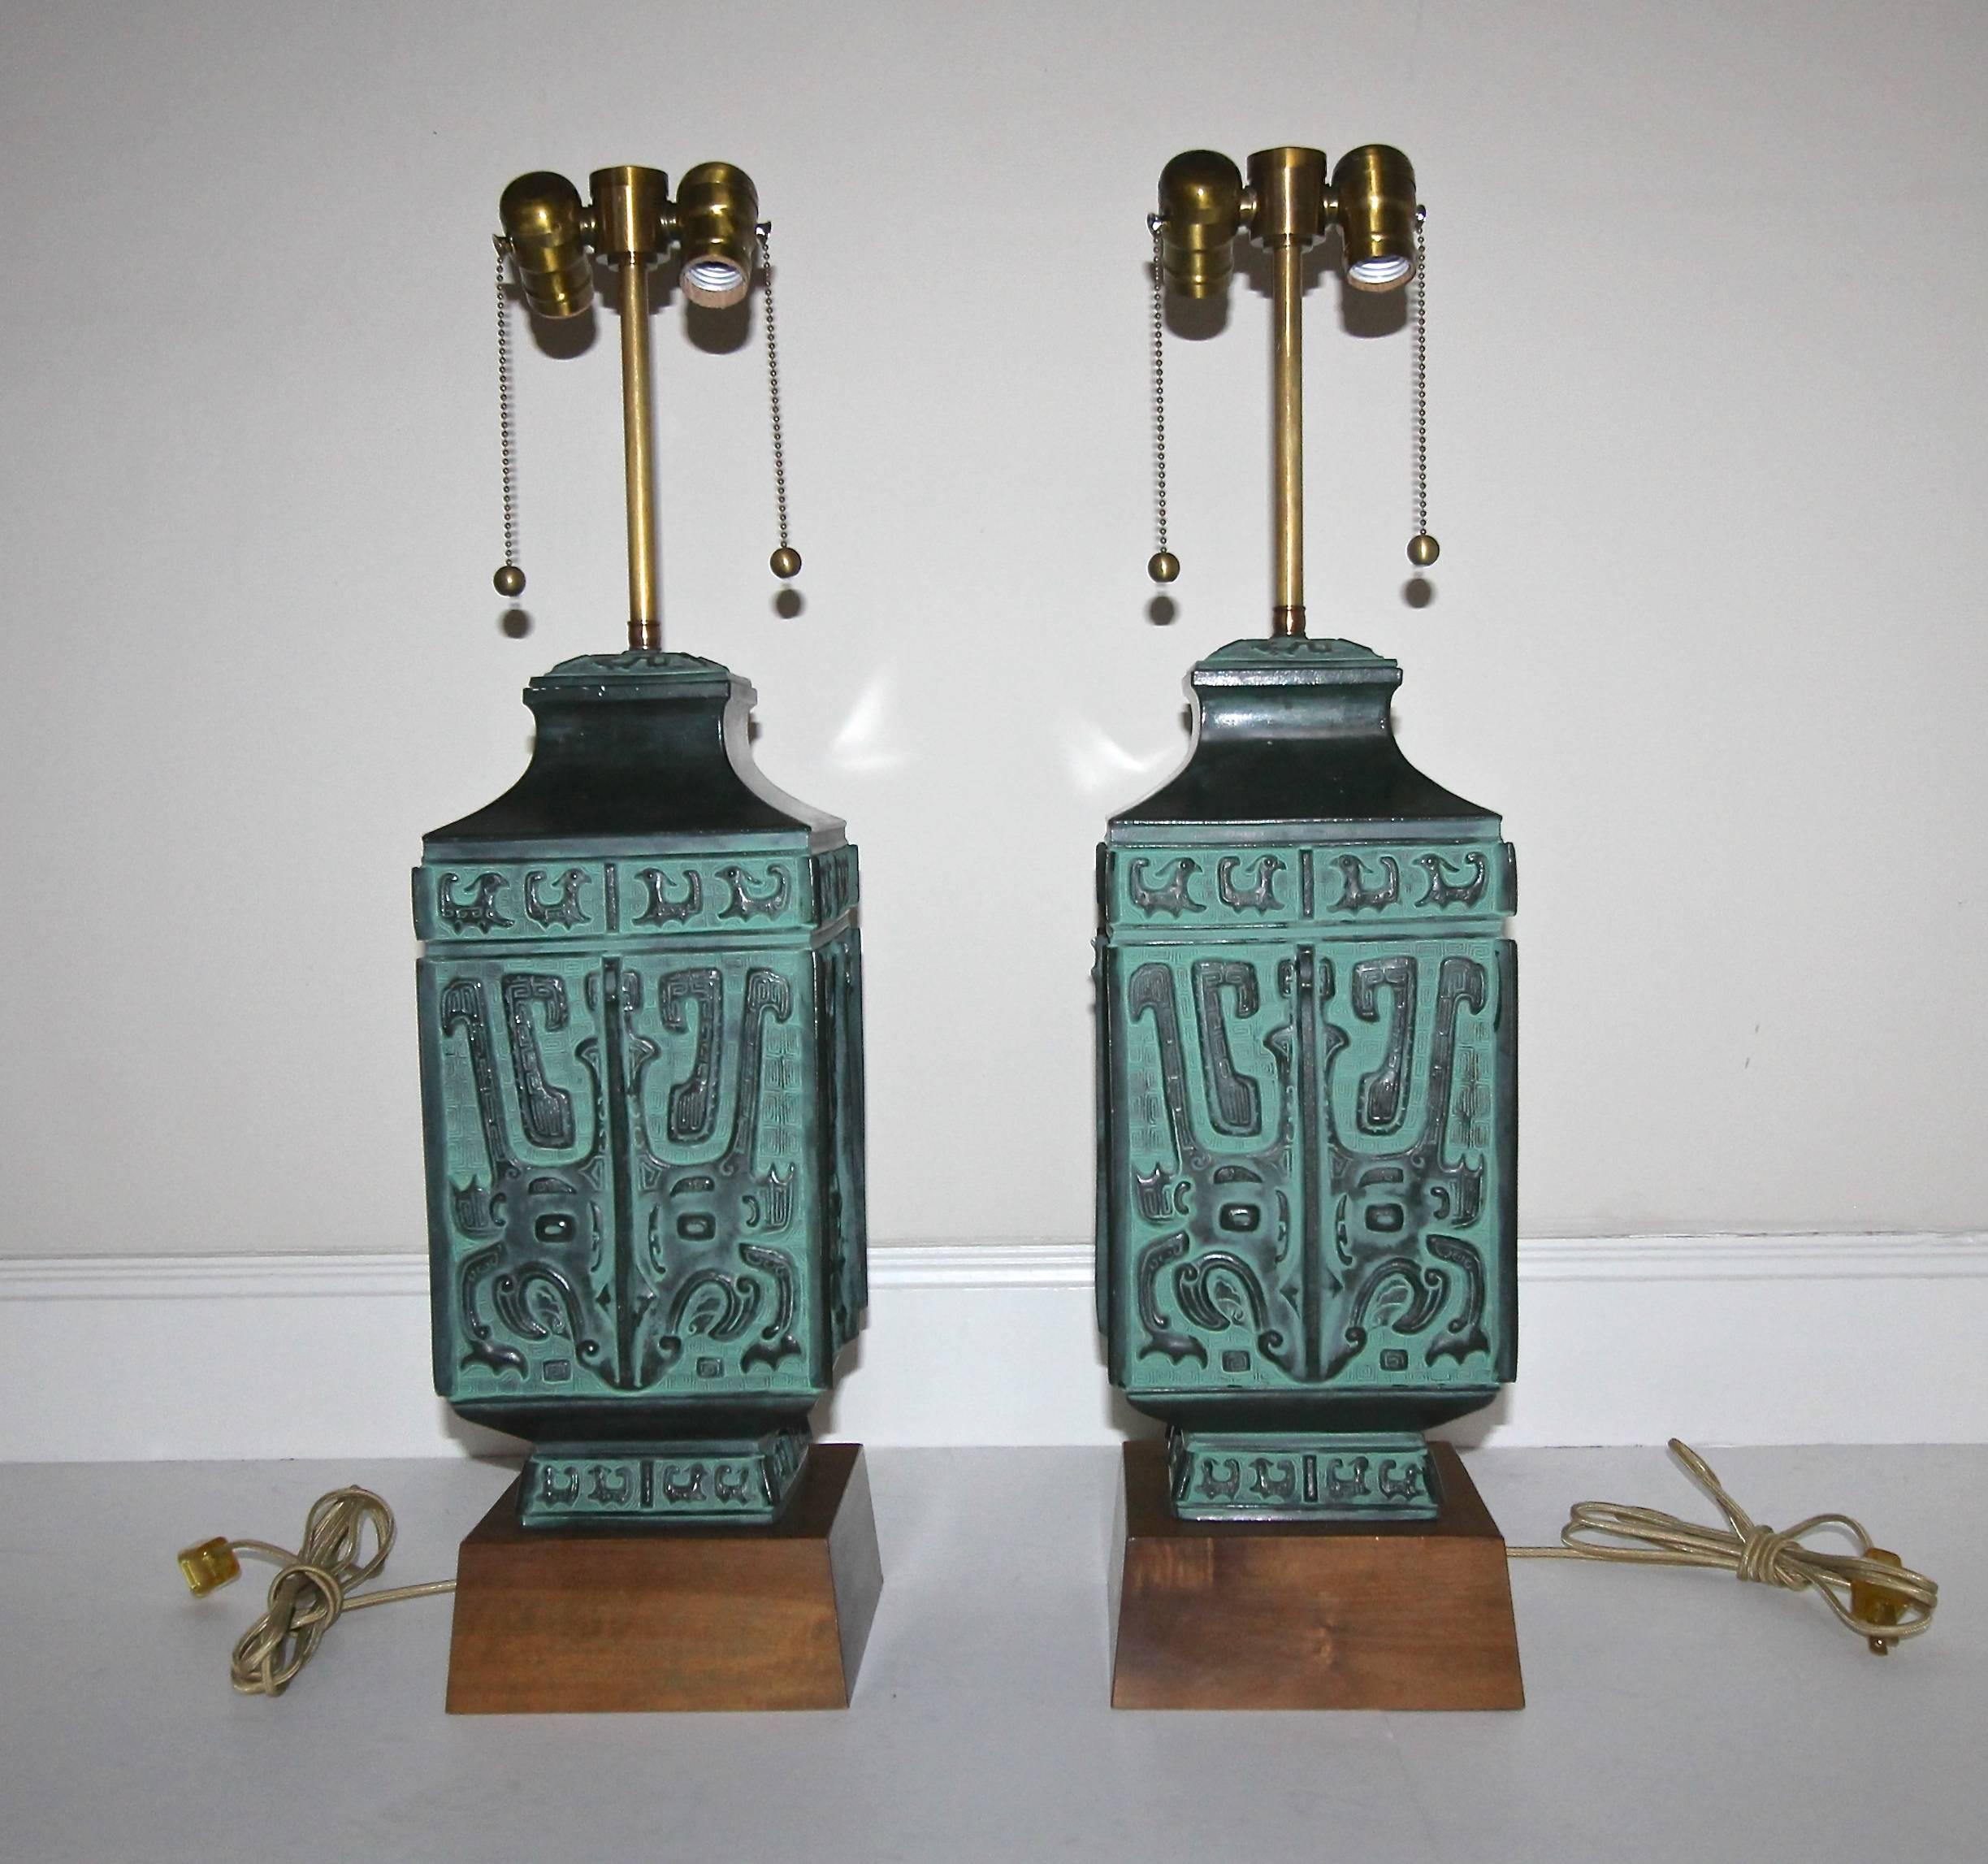 Pair of large cast metal table lamps in the manner of James Mont featuring archaic Chinese designs with a patinated verdigris finish on custom wood bases. Newly wired for US with double cluster brass sockets and rayon covered cords. Shades are not